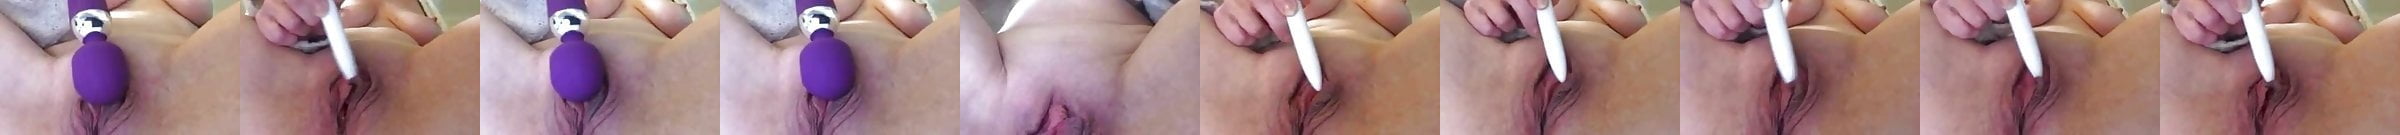 Horny MILF Buzzing Her Pussy Off Free HD Porn 09 XHamster XHamster